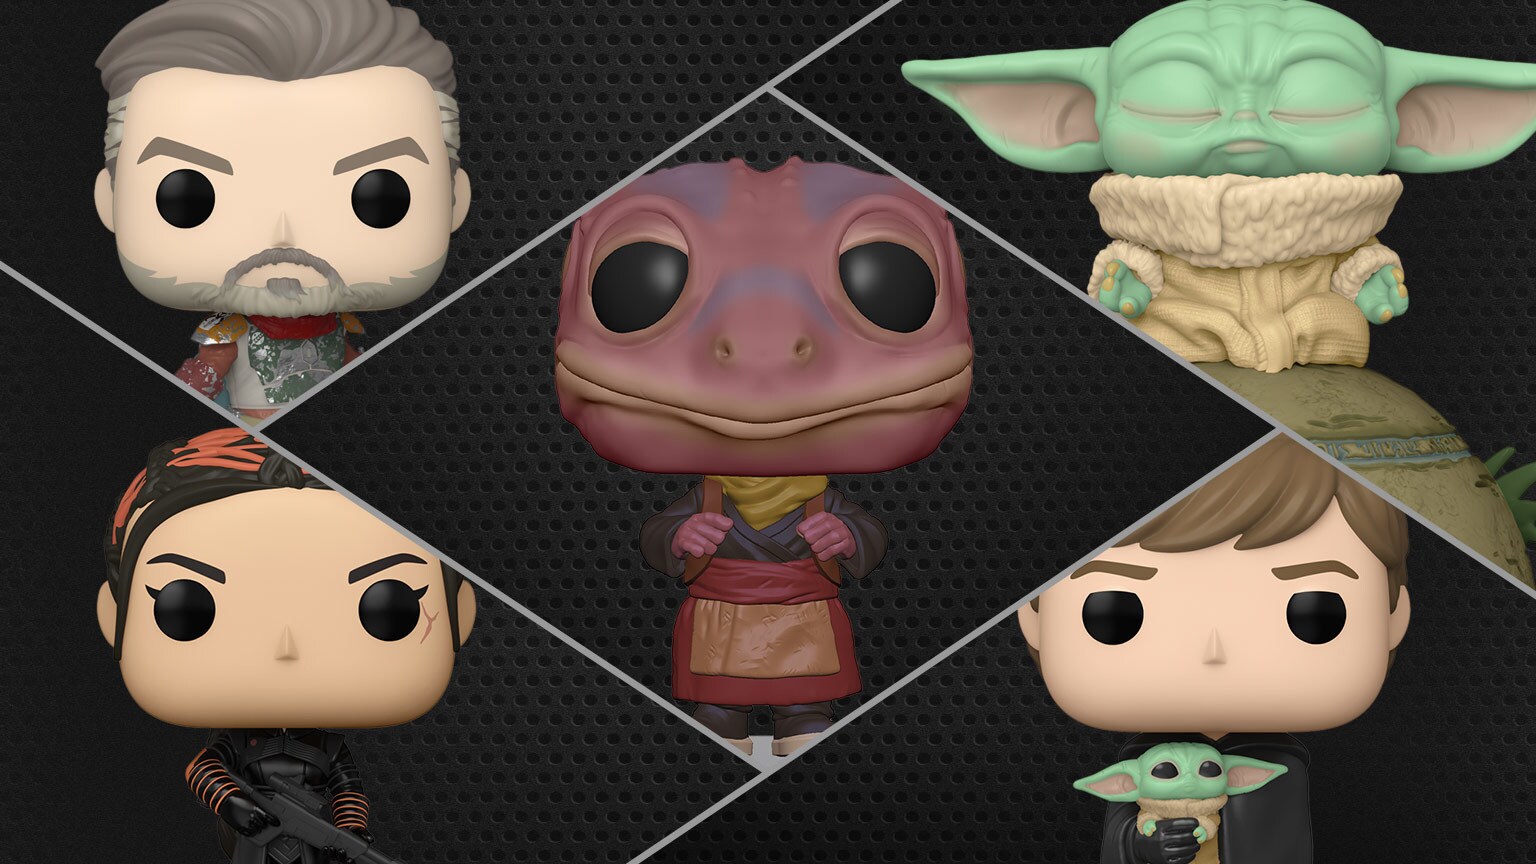 Boba Fett, Fennec Shand, and Frog Lady from The Mandalorian Get the Funko Pop! Treatment – Exclusive Reveal